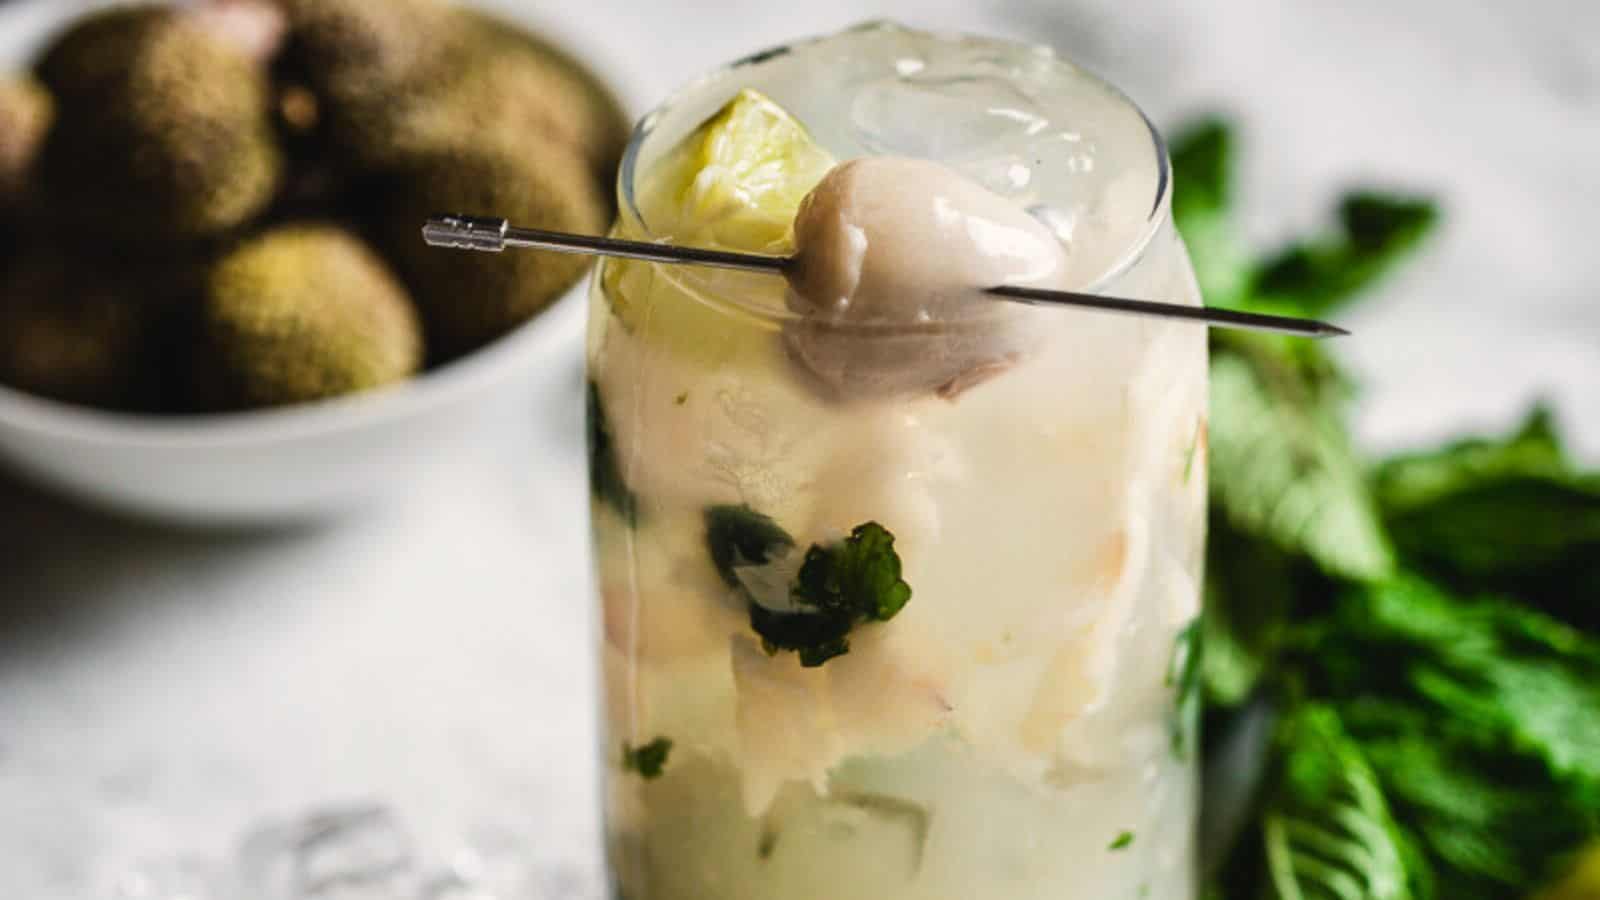 Try a refreshing cocktail with mint leaves and a lychee garnish, served on ice in a tall glass.